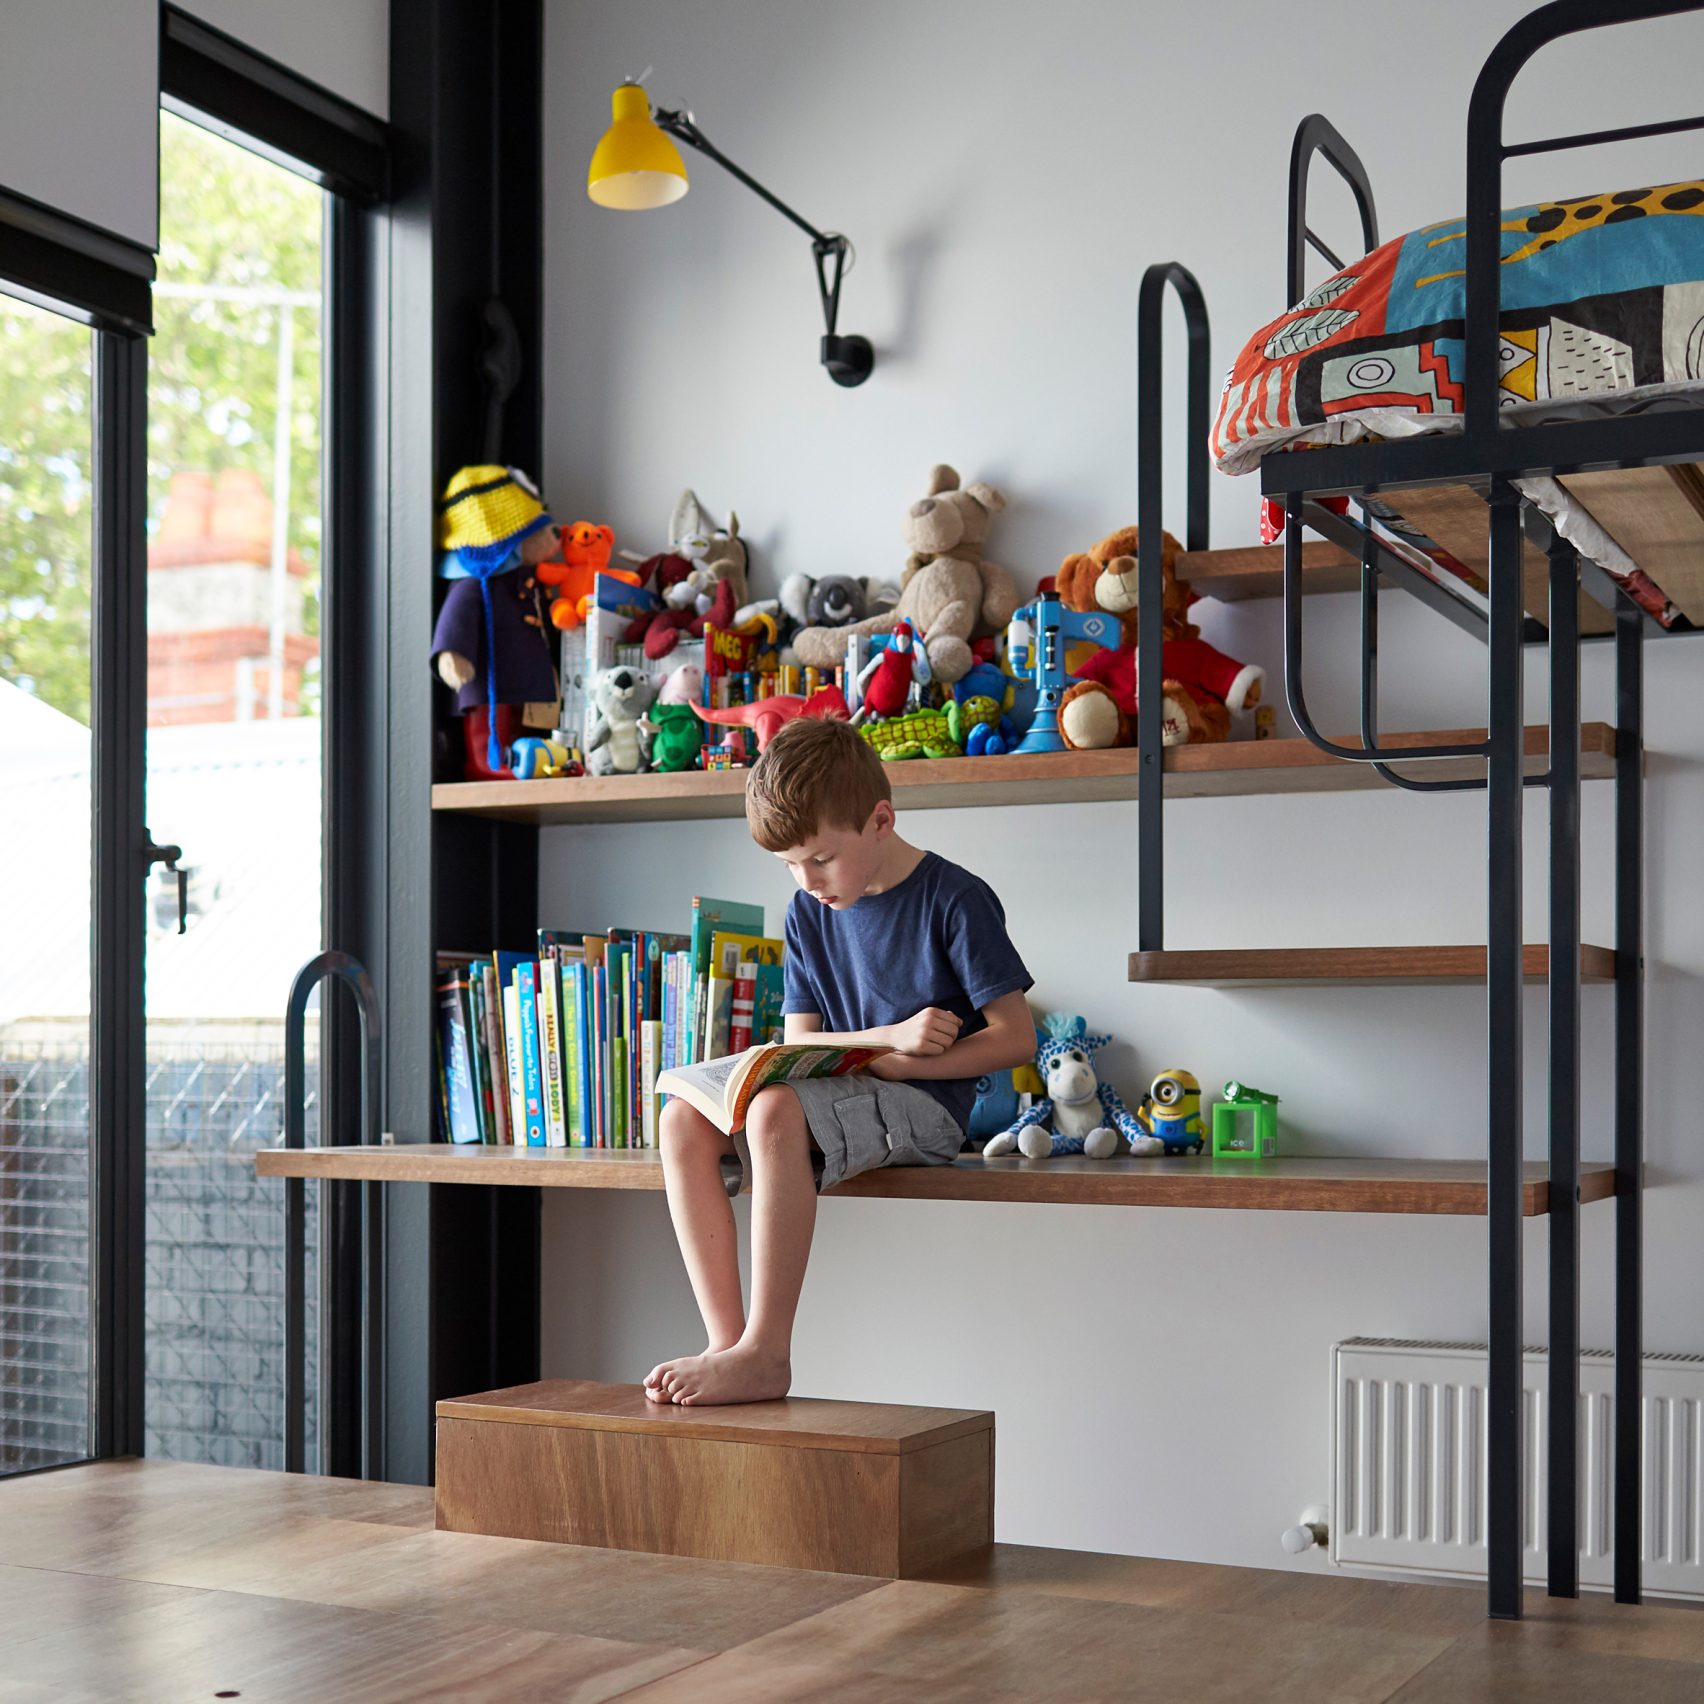 You'll Find This Children Room Design The Most Fun! 6home design ideas, home interior decor, children room design, Russian summer house, indoor play area, industrial style lamp